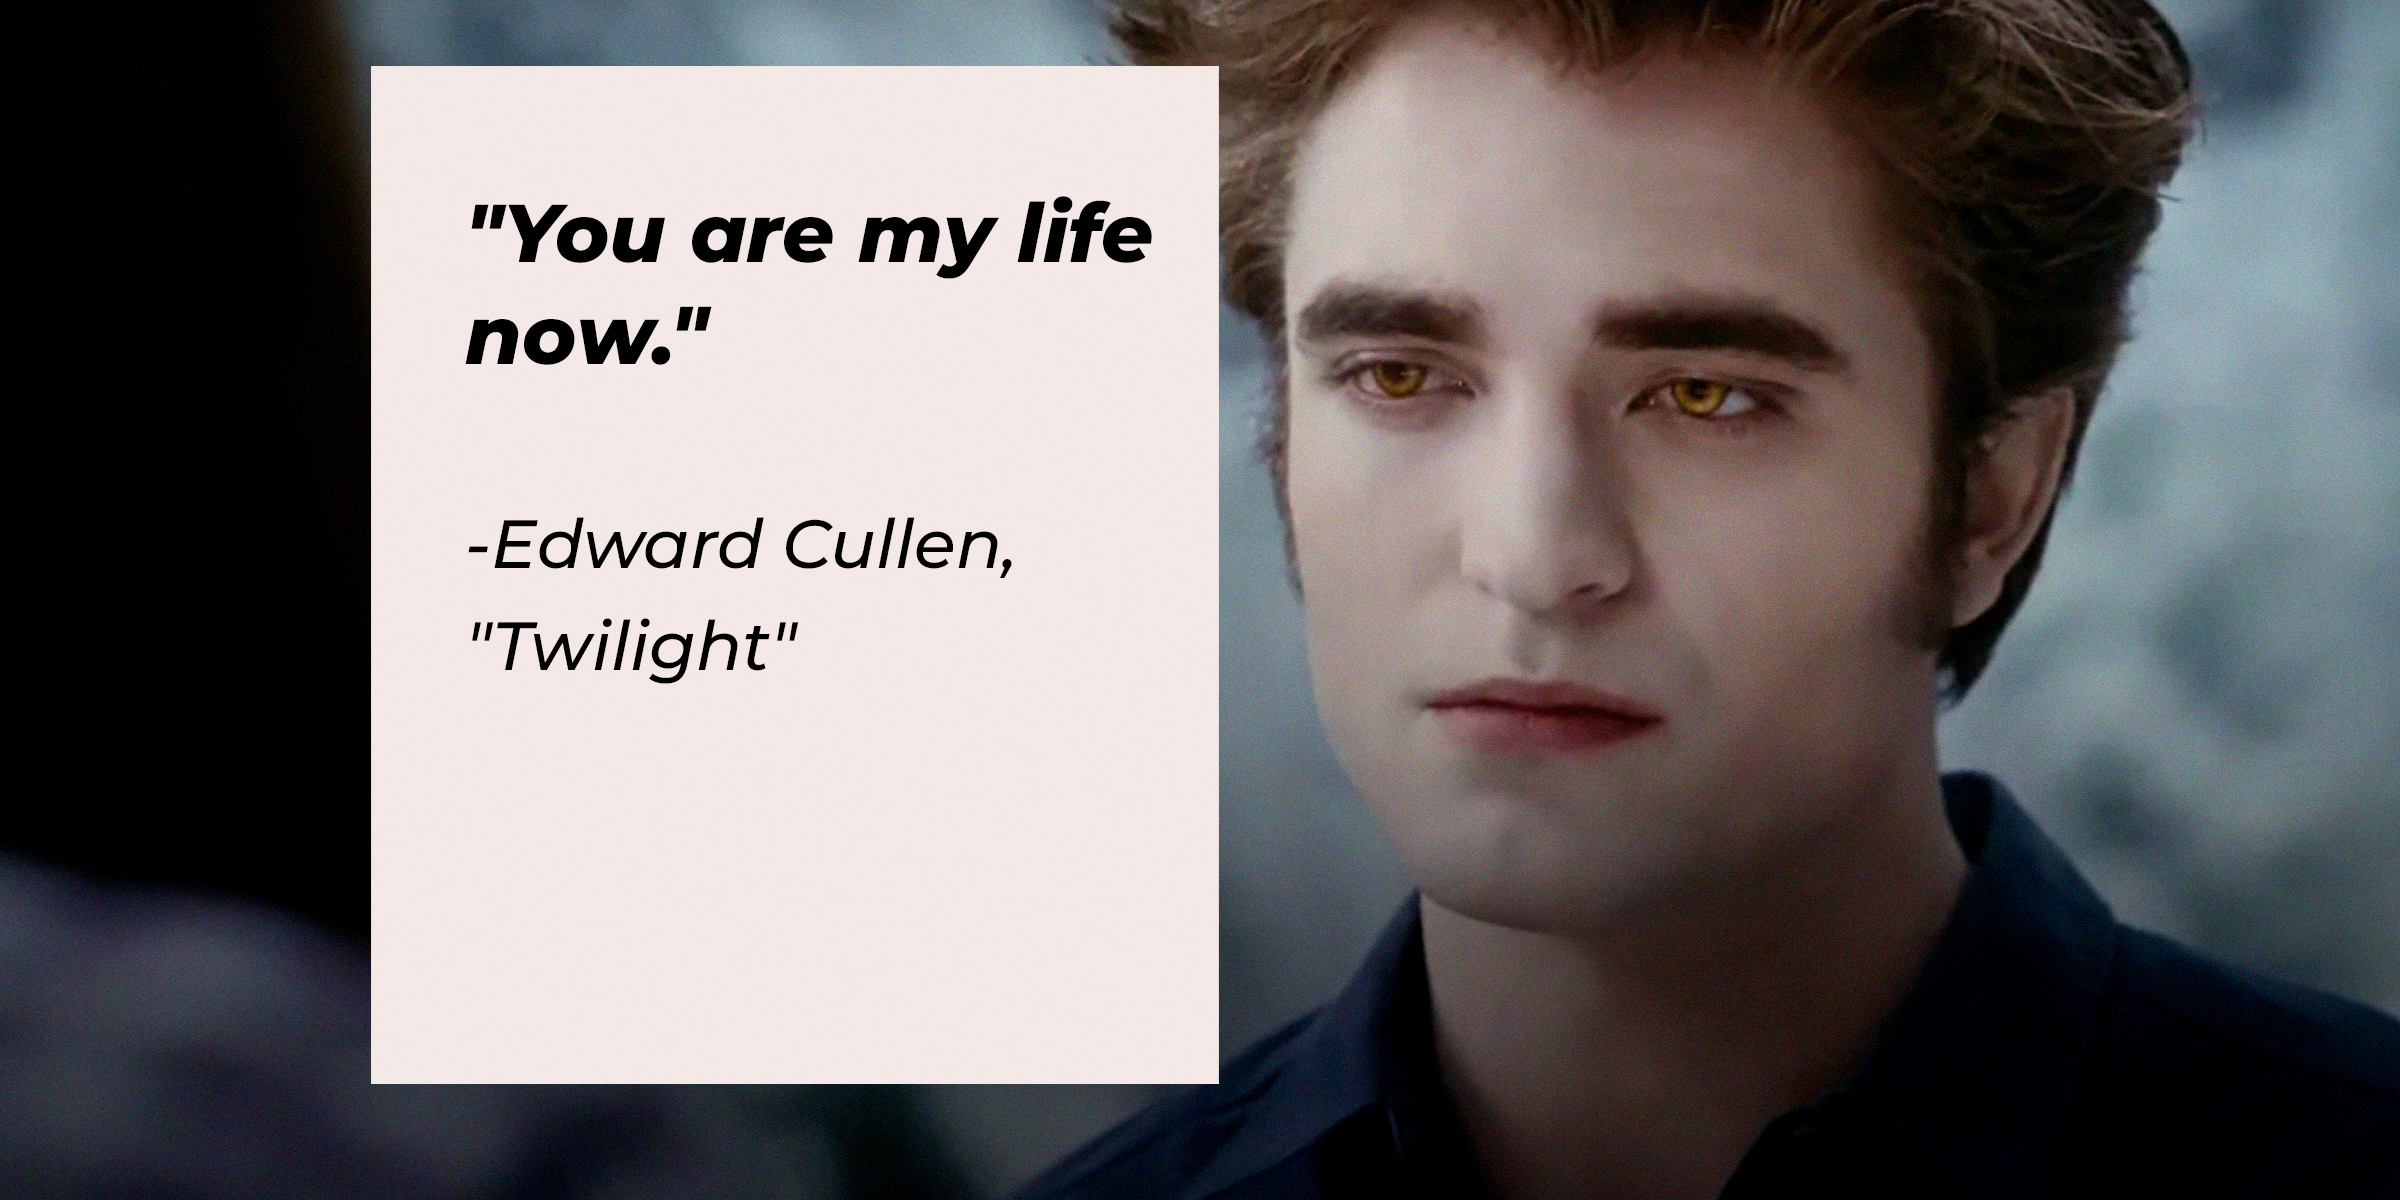 Edward Cullen with his quote: "You are my life now." | Source: Facebook.com/twilight